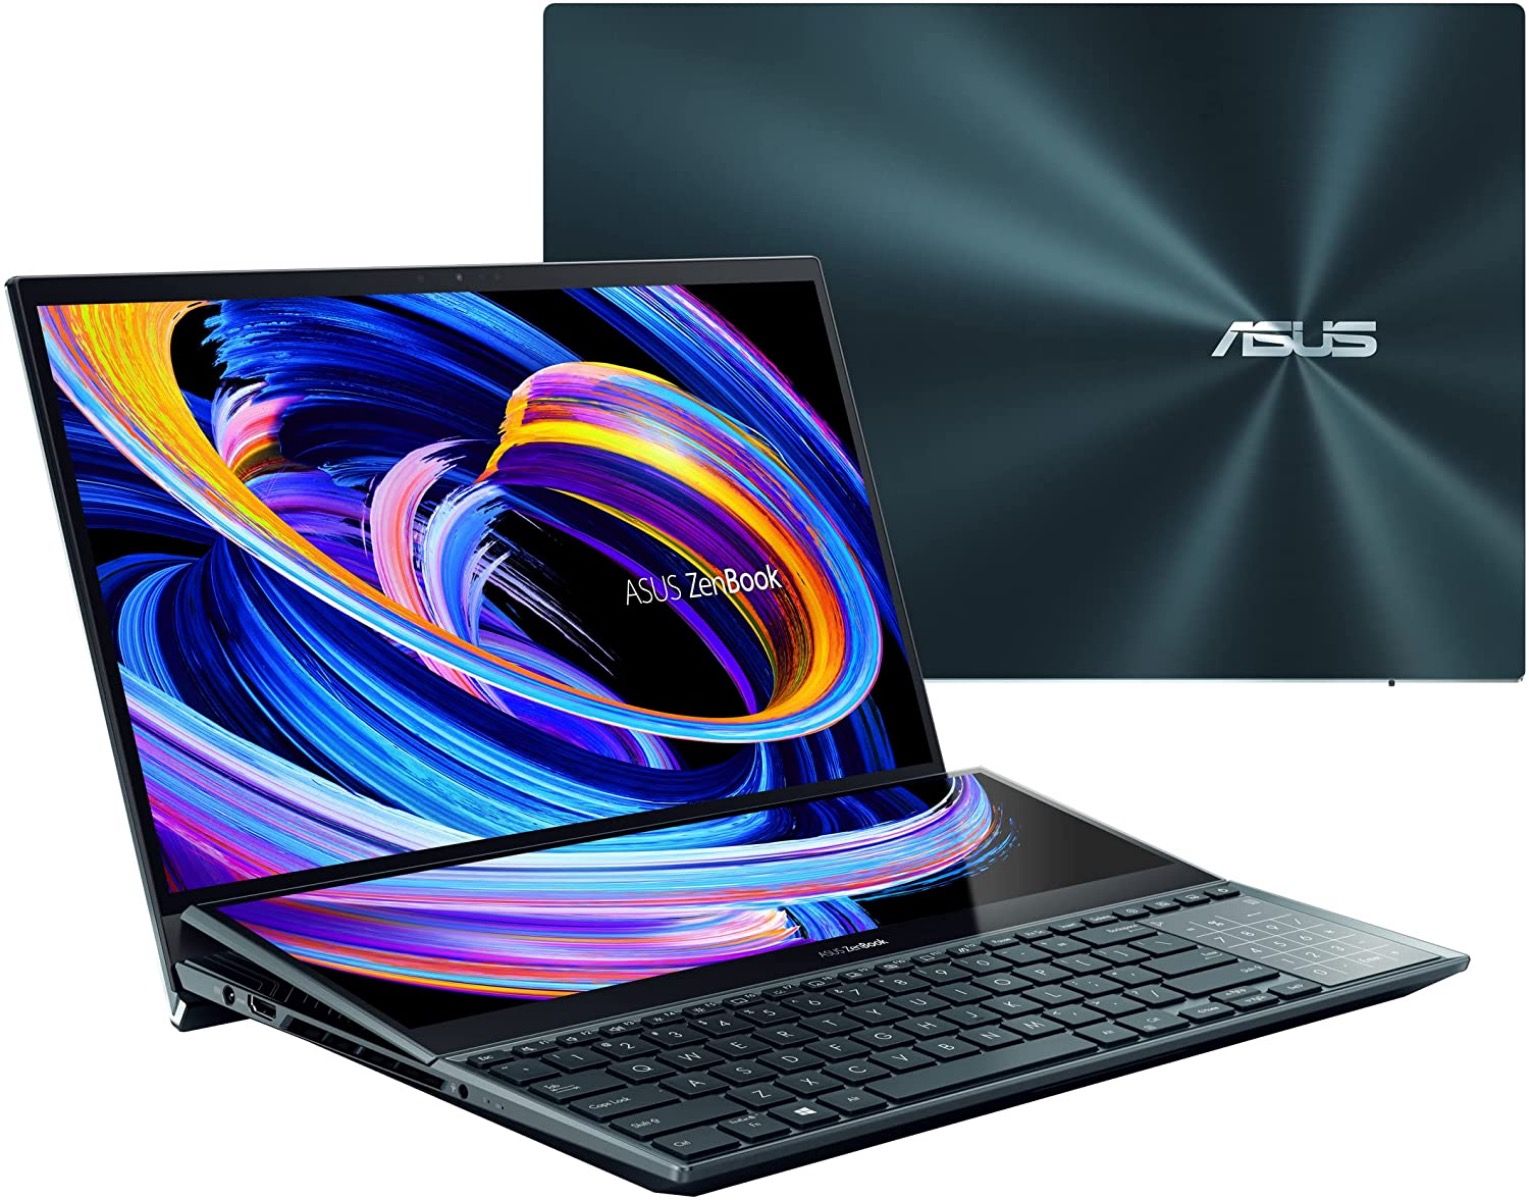 Side shot of the Asus ZenBook Pro Duo 15 Display with lit up immersive display and shot of the top of a closed laptop in the background